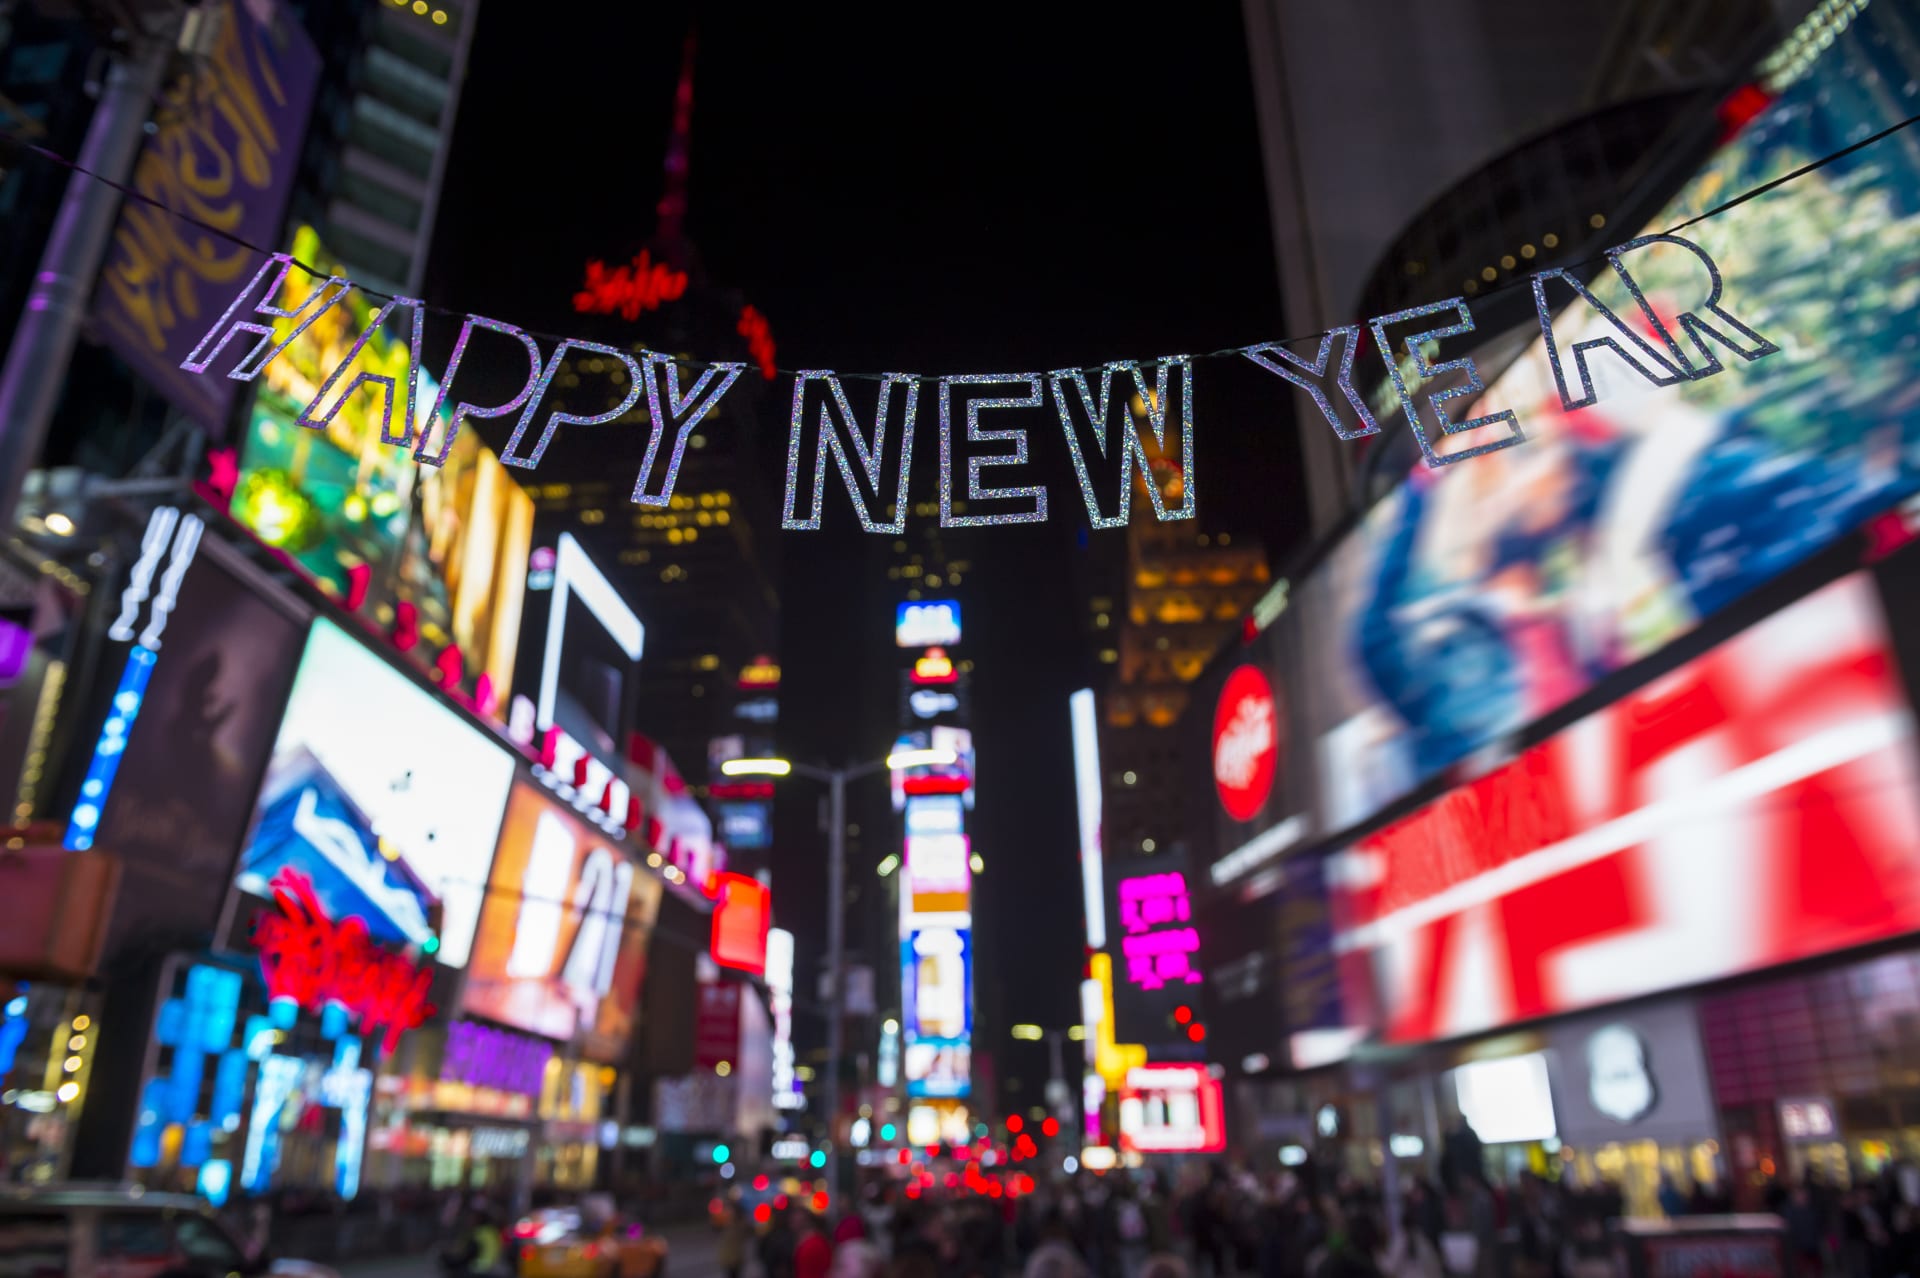 New Year greeting in New York